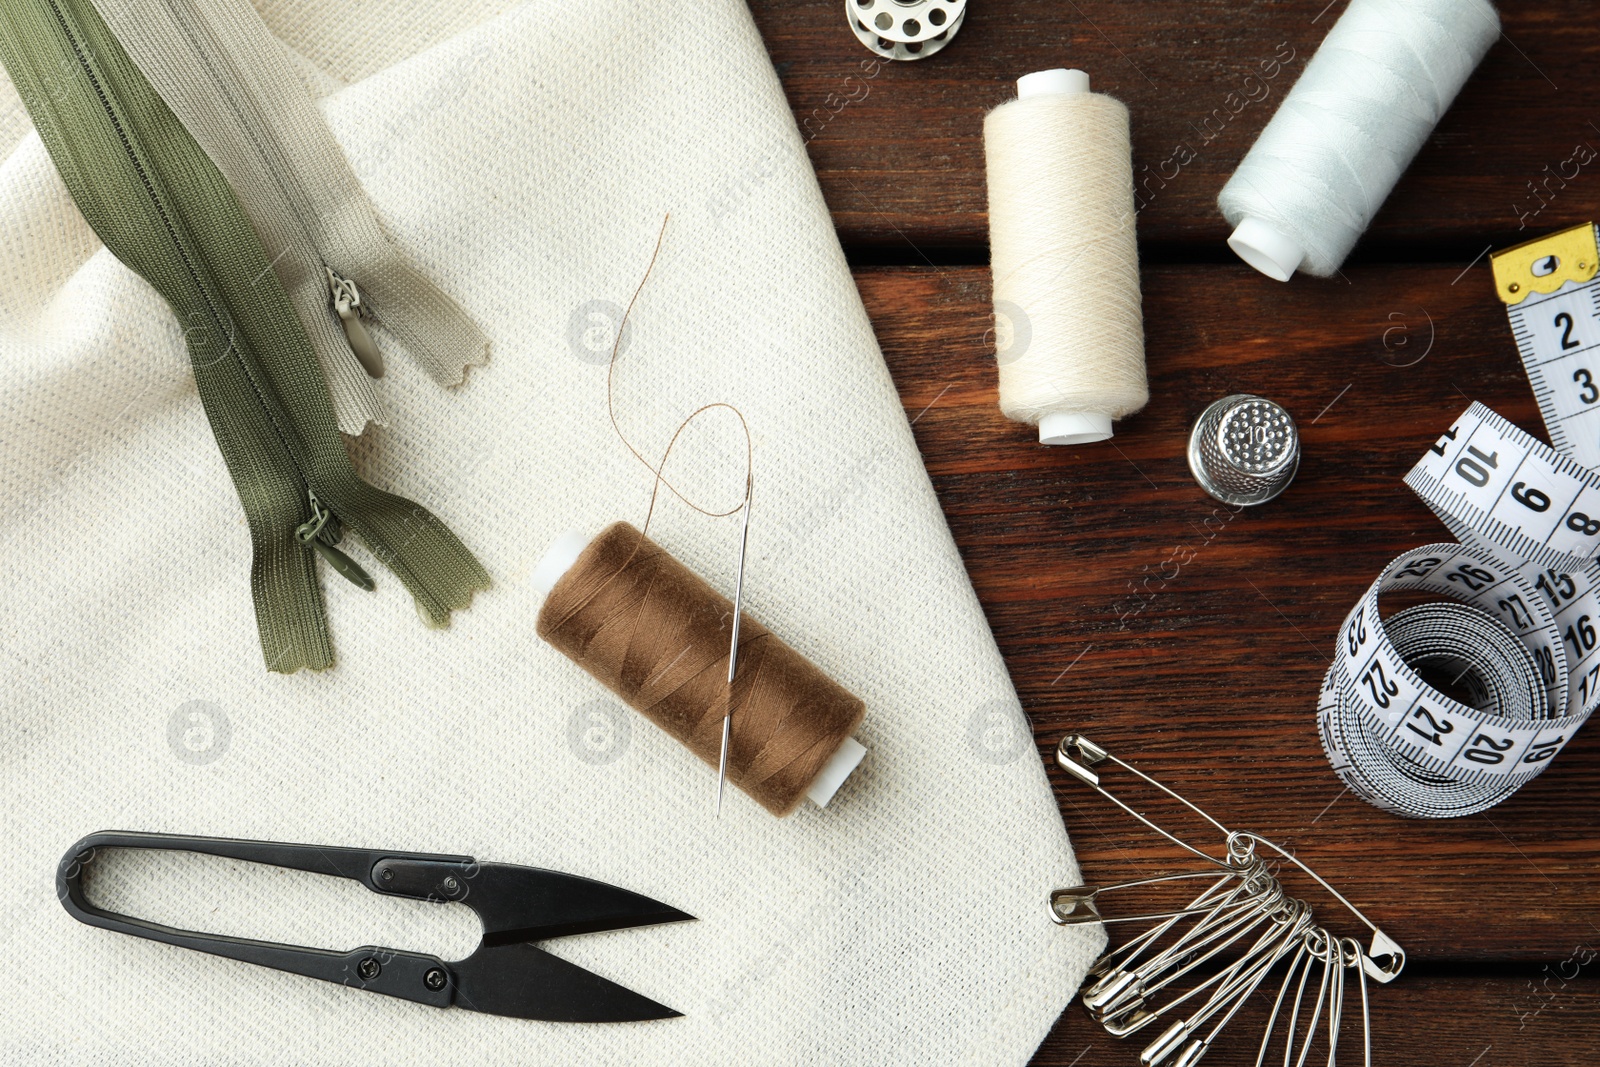 Photo of Threads and other sewing supplies on wooden table, flat lay